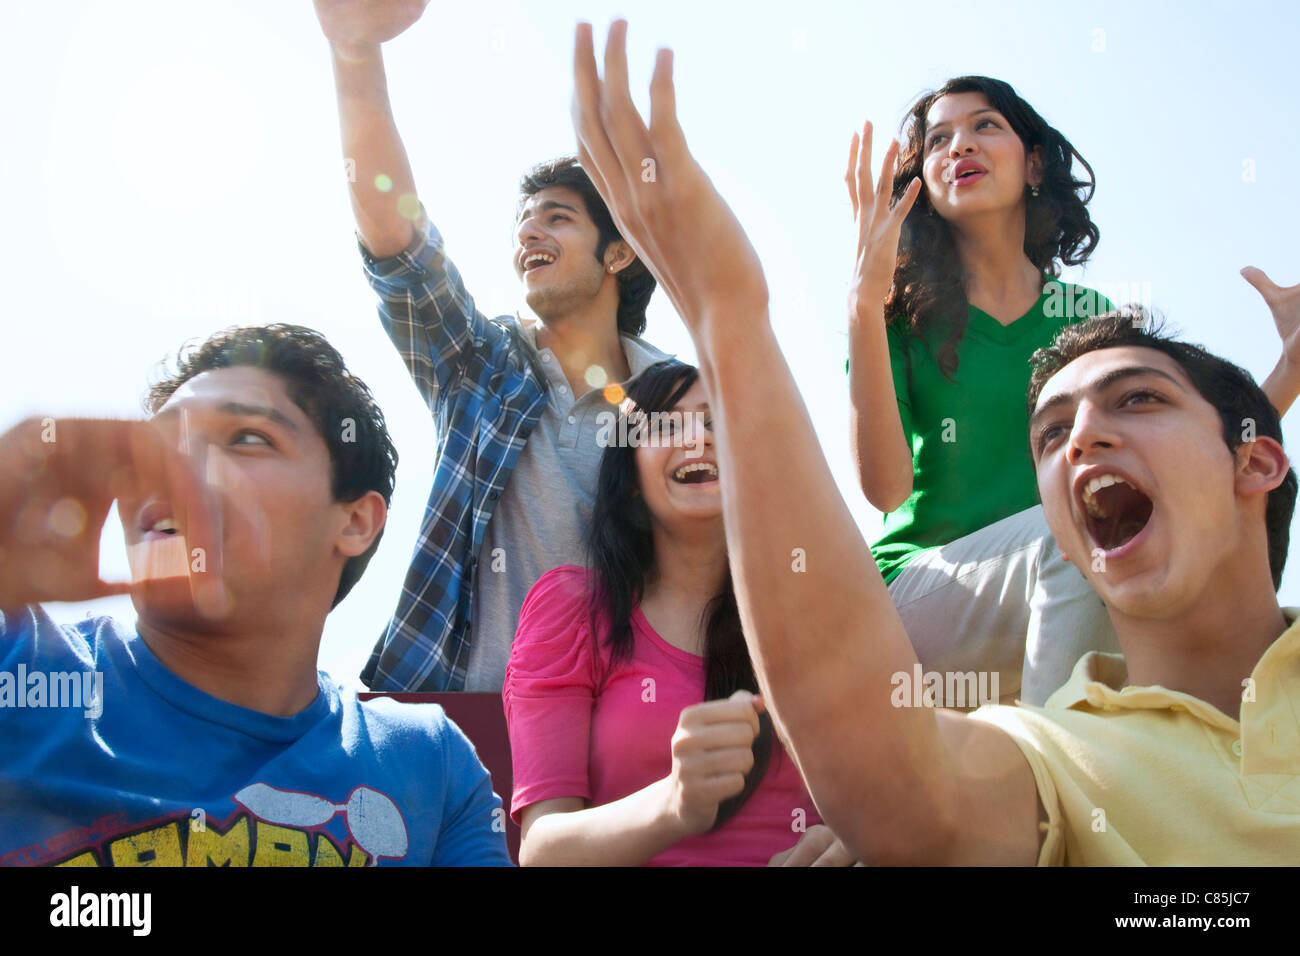 Youngsters cheering Stock Photo